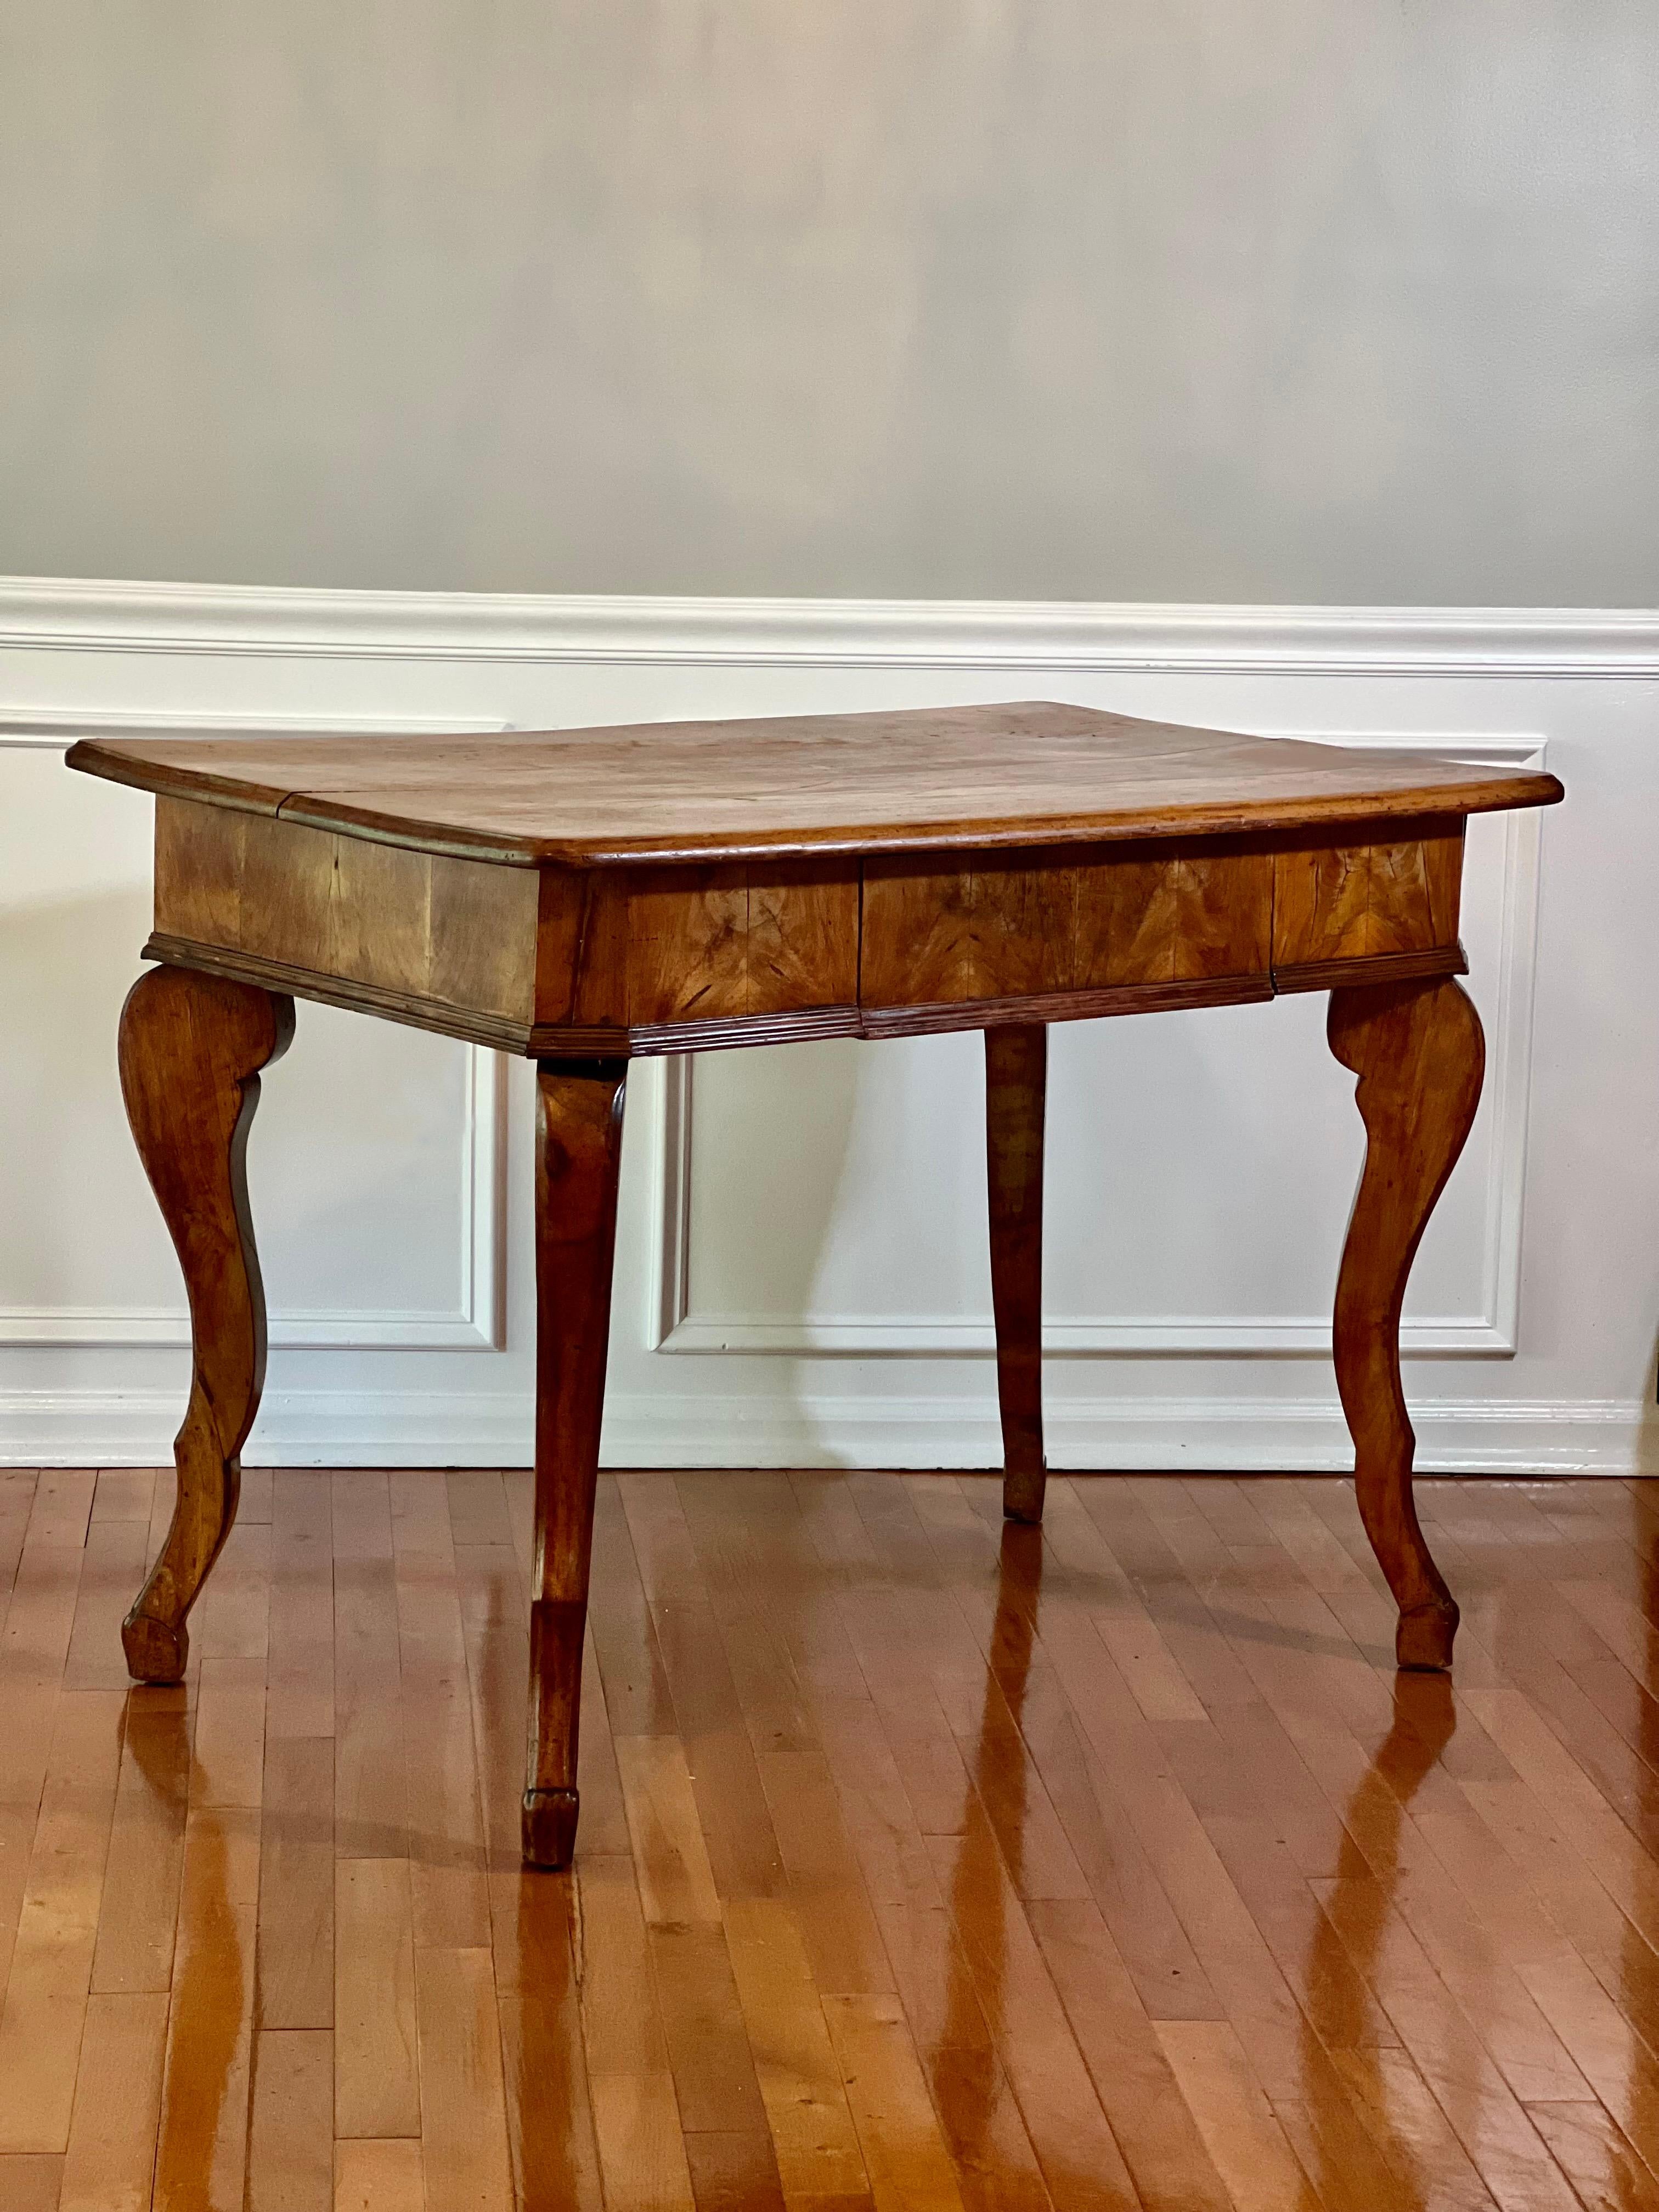 Antique Country French farmhouse walnut work table, France, circa 1850.

This beautiful table embodies rustic elegance. Crafted of wormy walnut, a high grade wood the French used to make work tables and farm related 